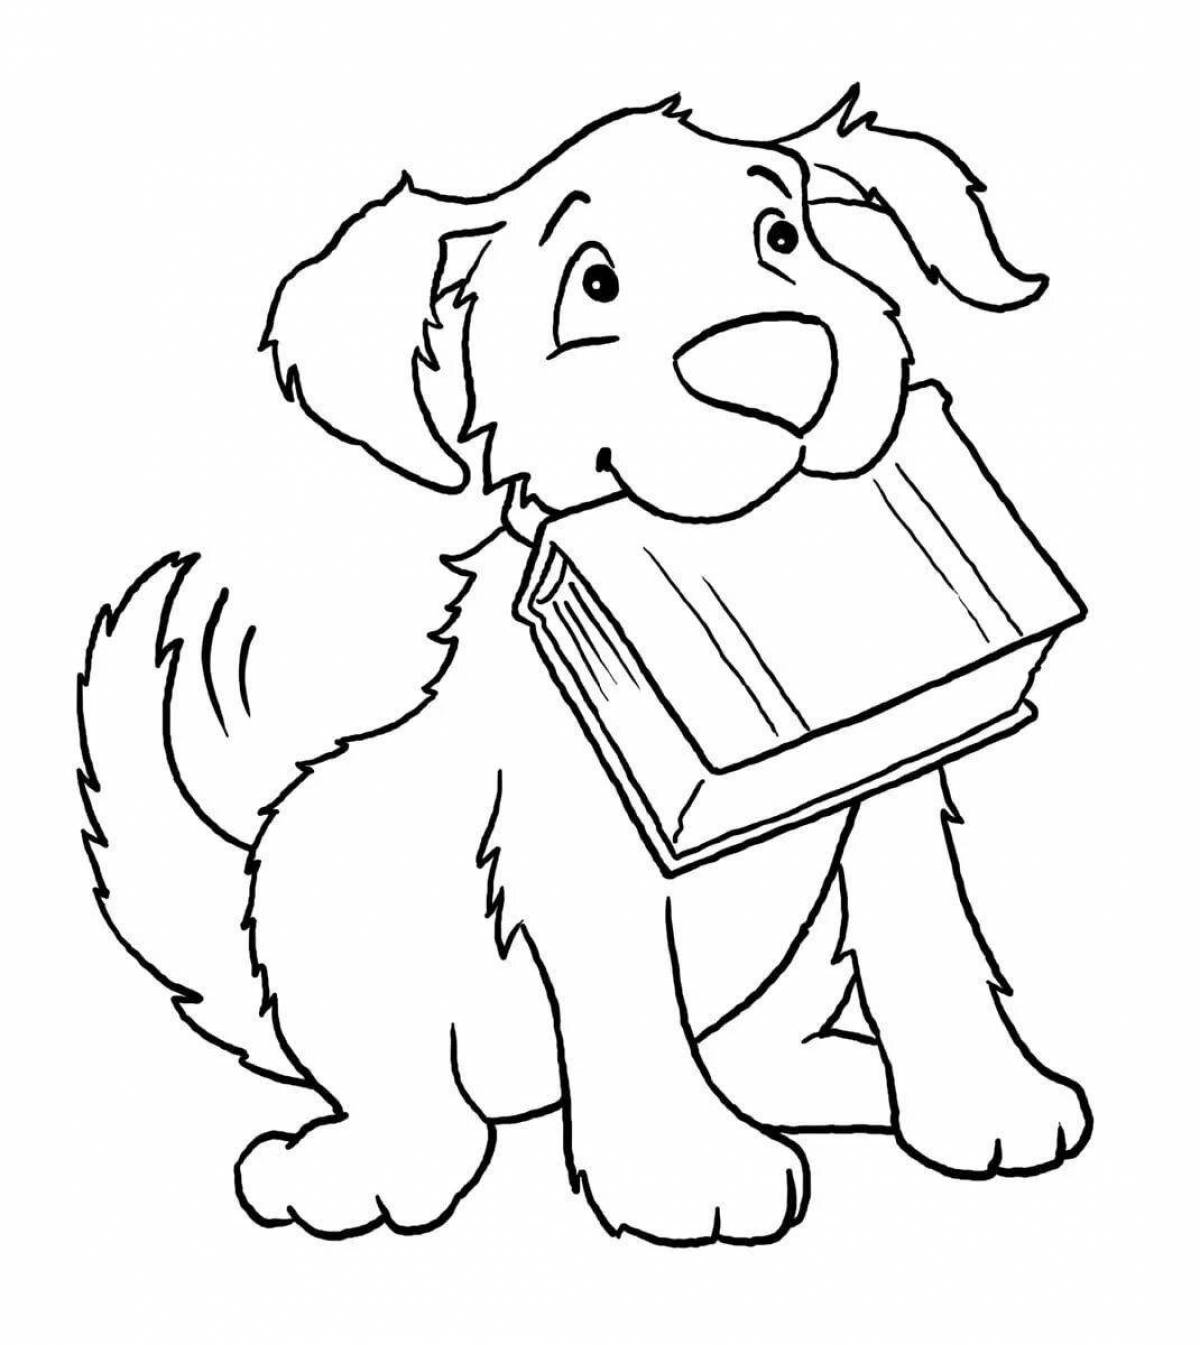 Cute Mikhalkov puppy coloring book